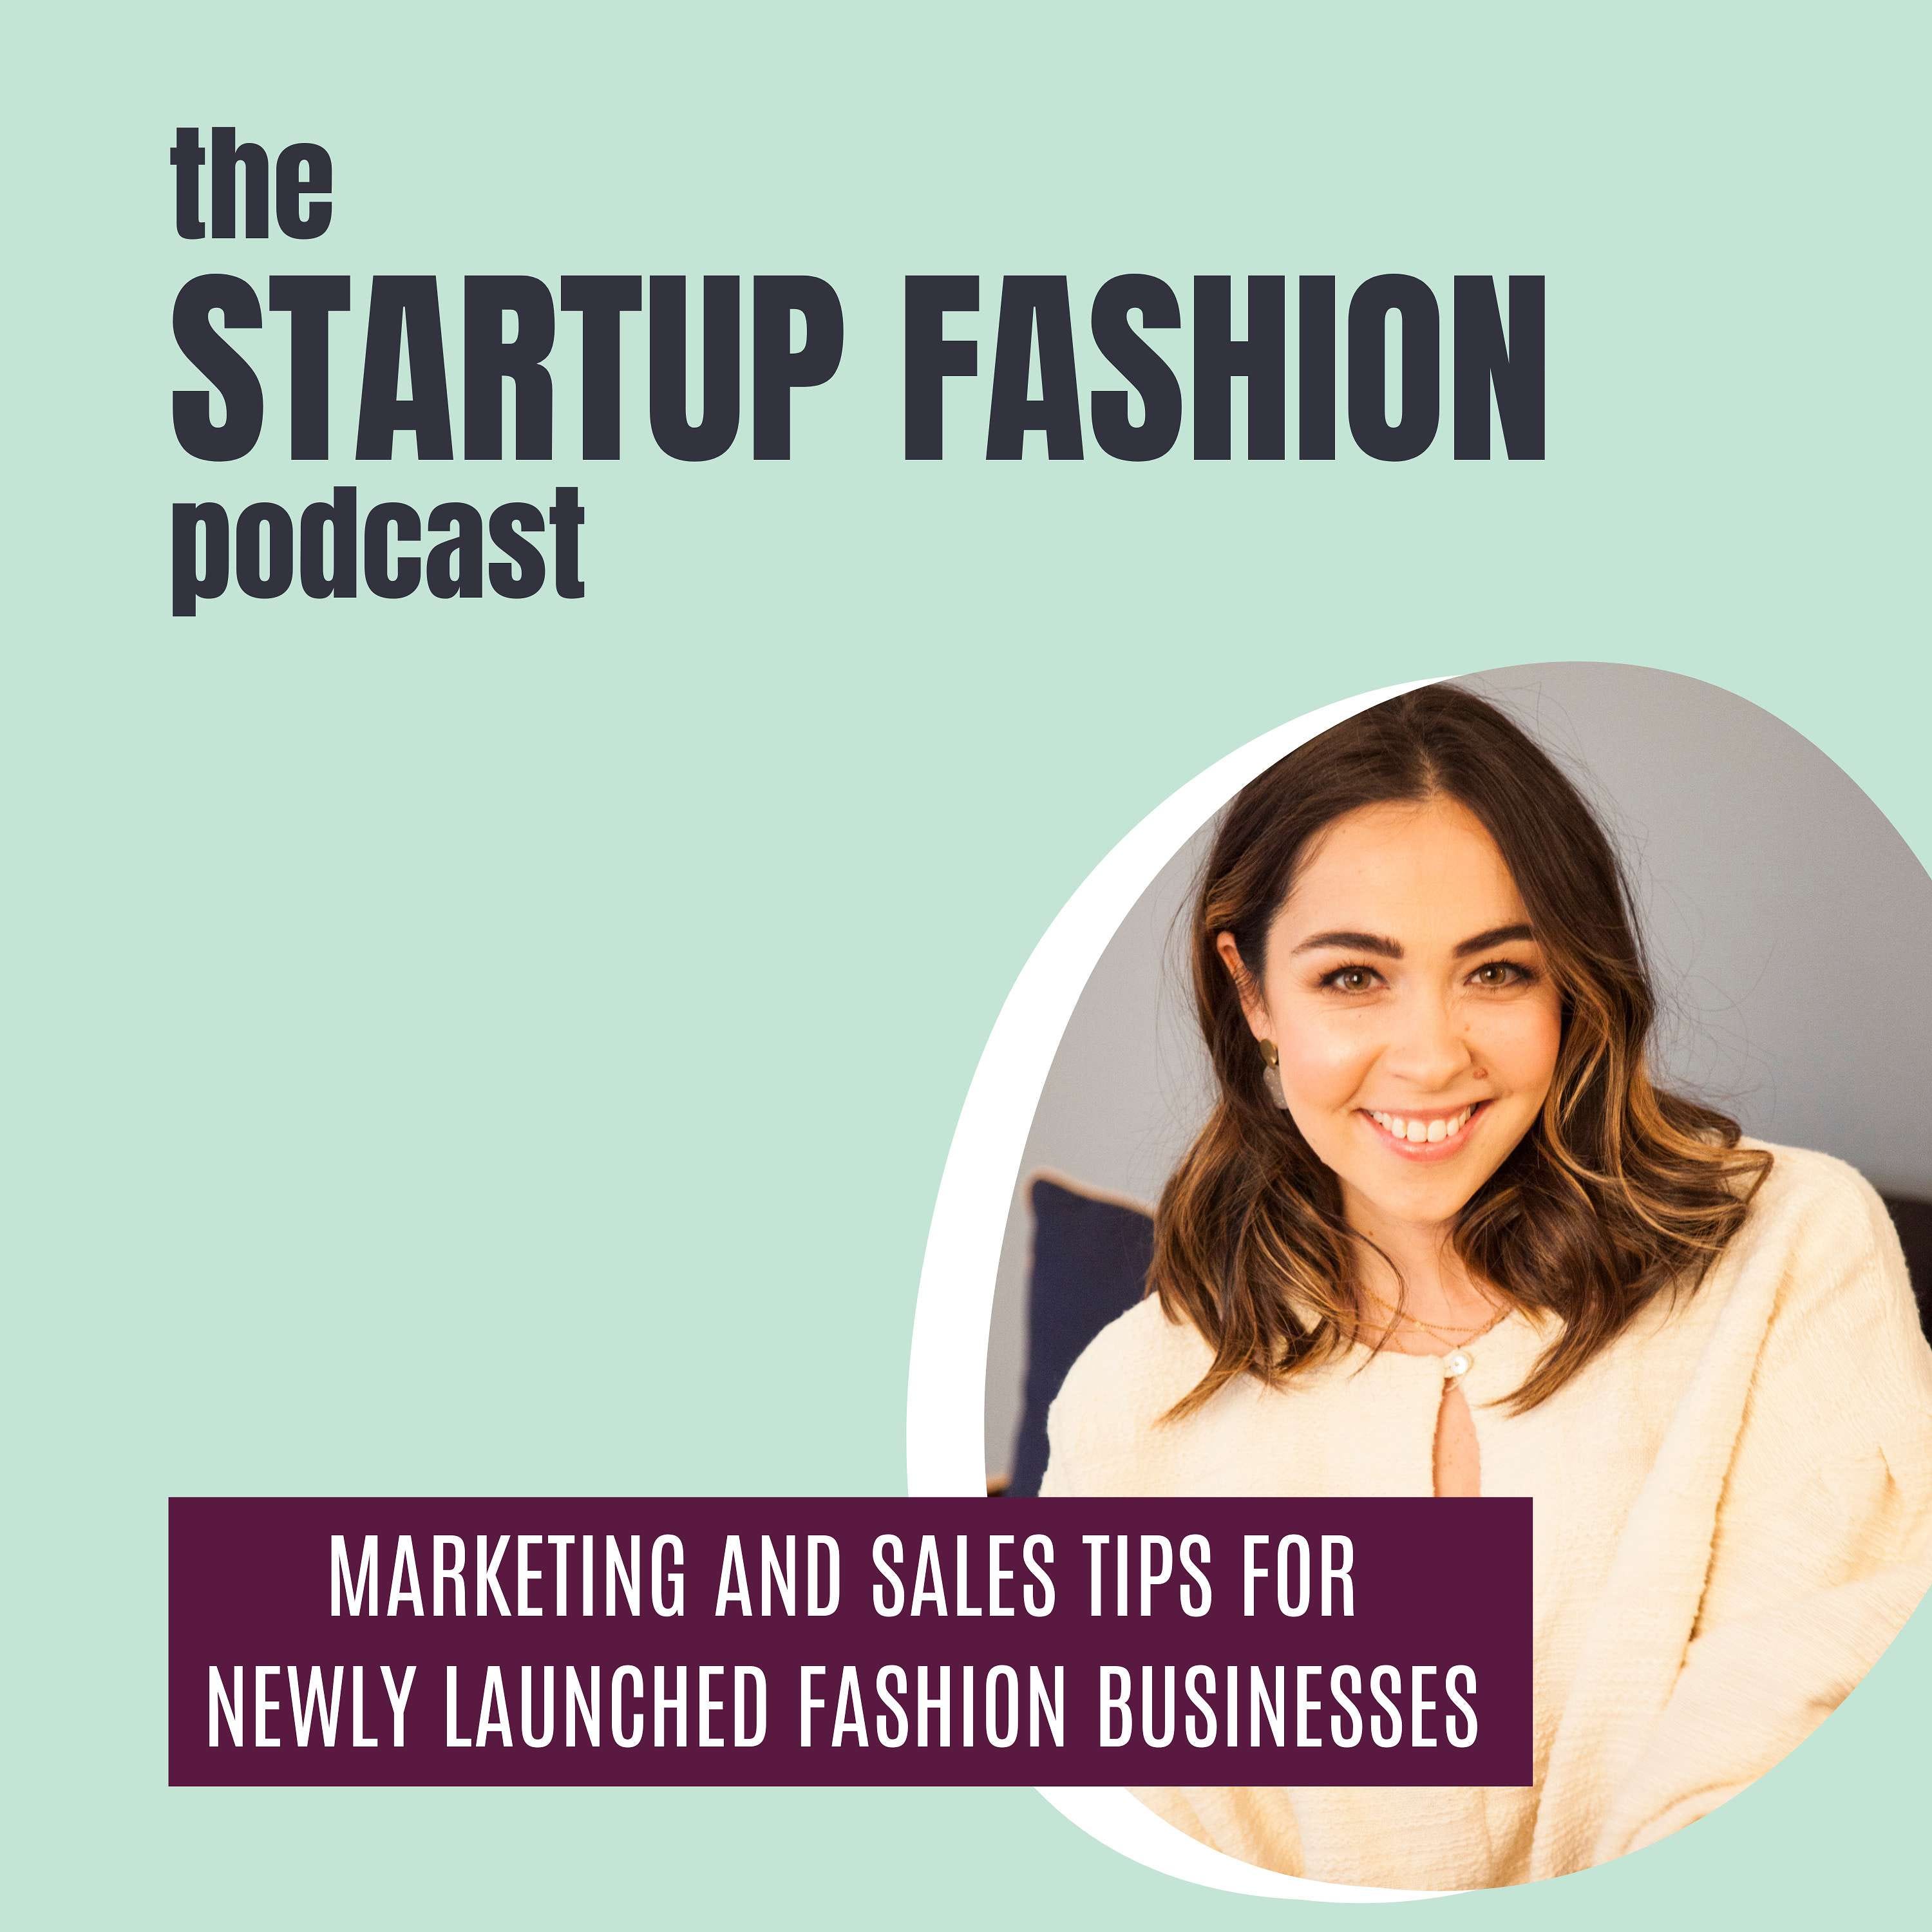 HOW TO BUILD BRAND LOYALTY AS A FASHION BUSINESS OWNER